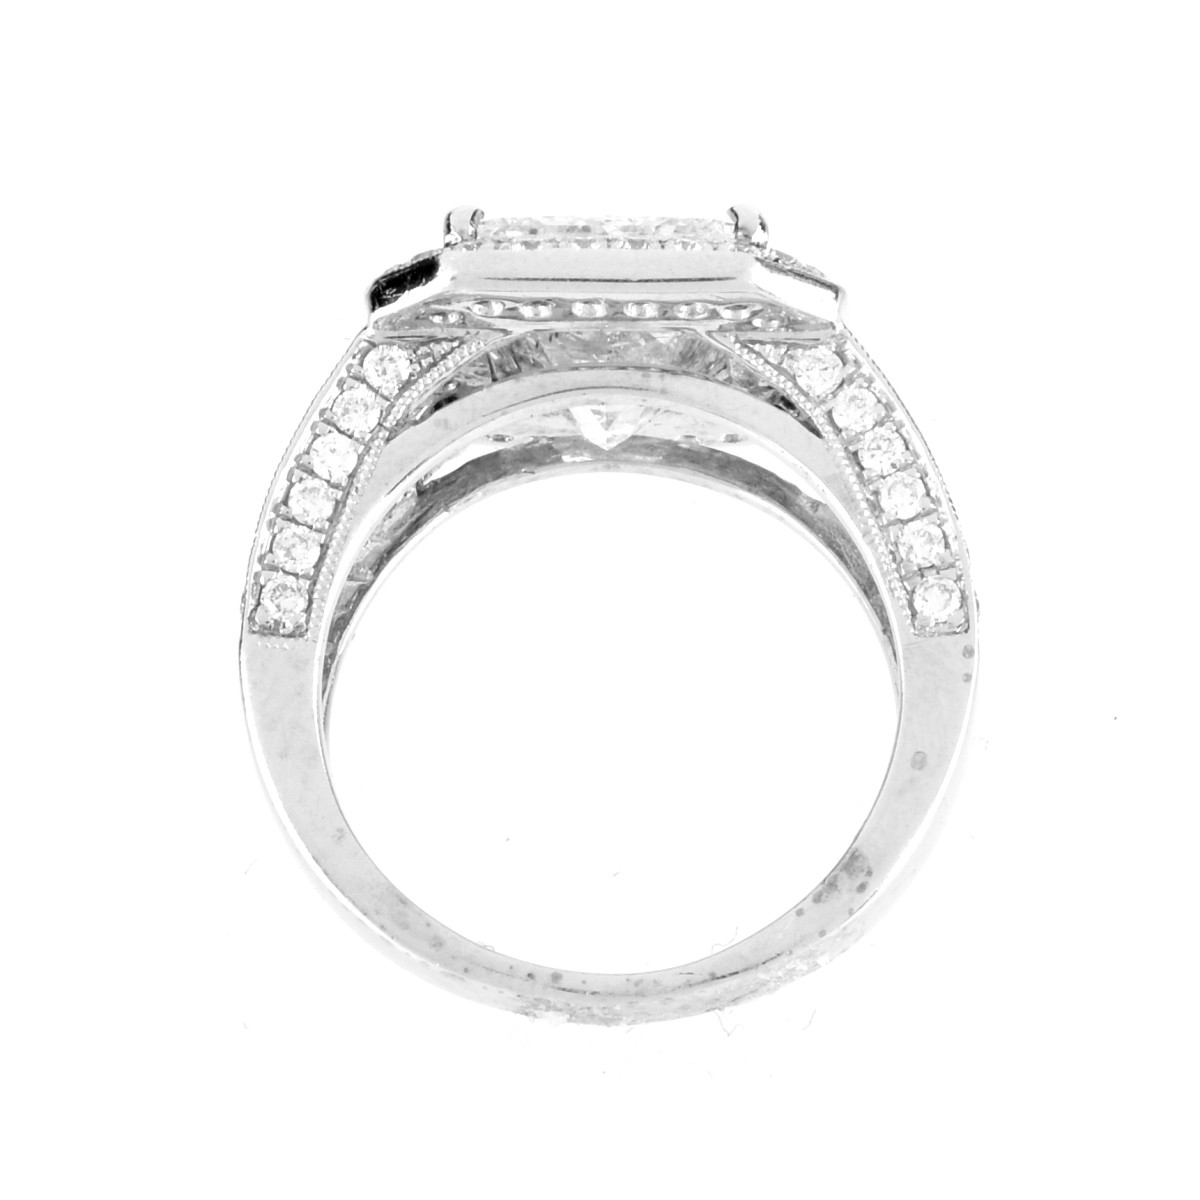 5.54ct TW Diamond and 14K Gold Ring